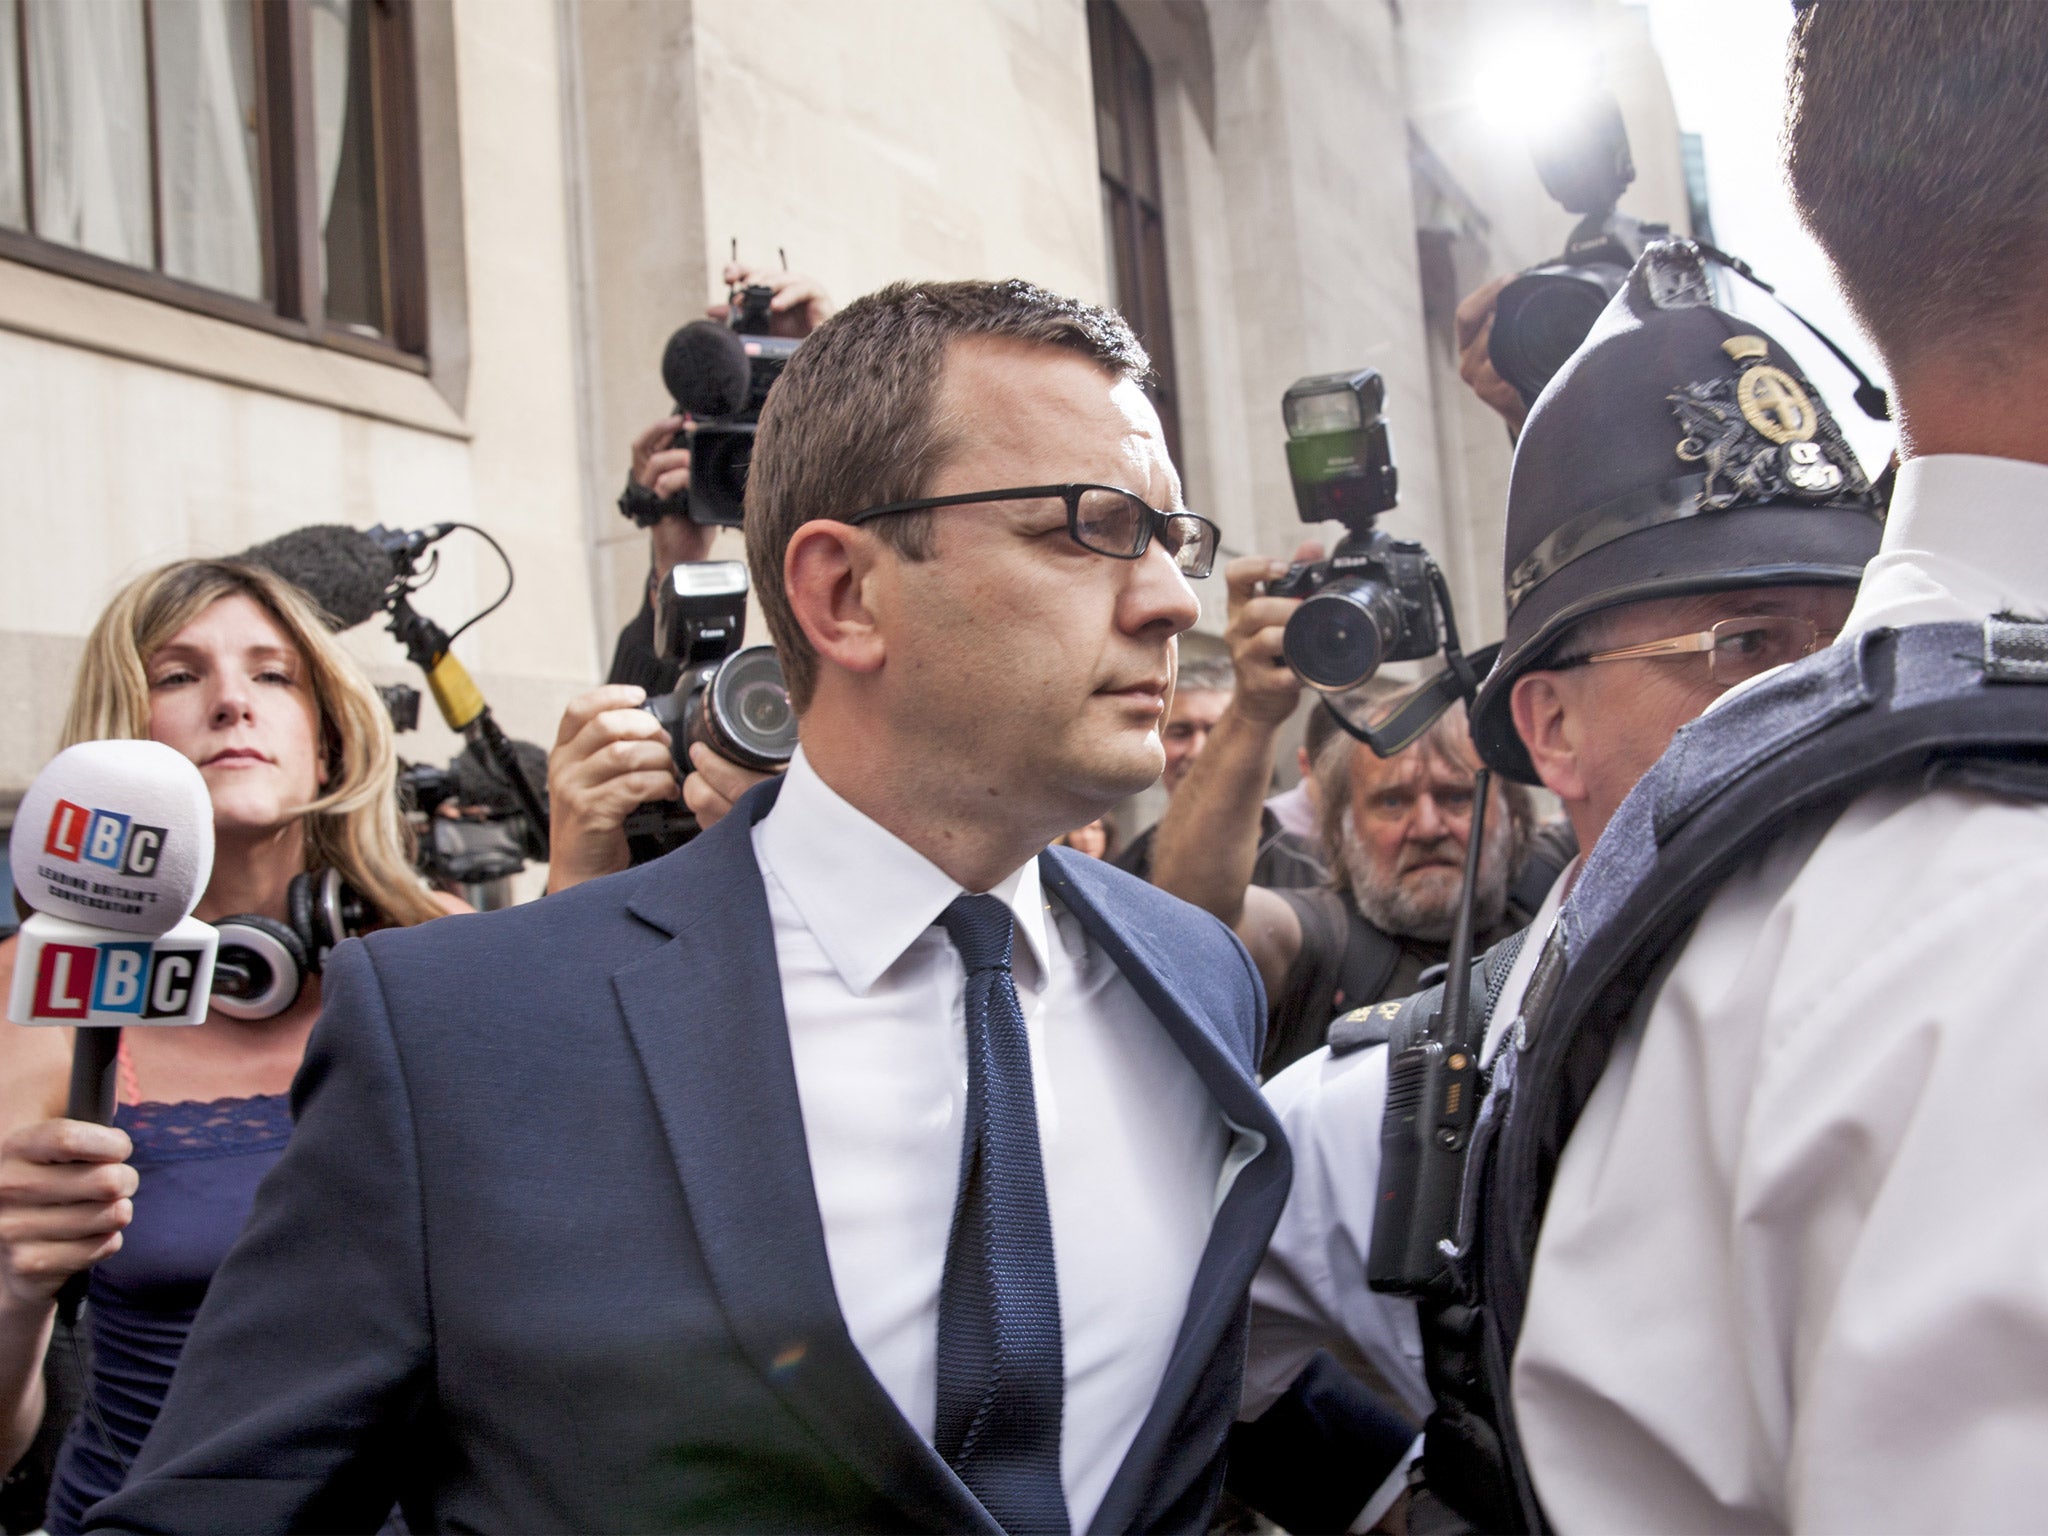 Andy Coulson leaves the Old Bailey after being found guilty of phone hacking